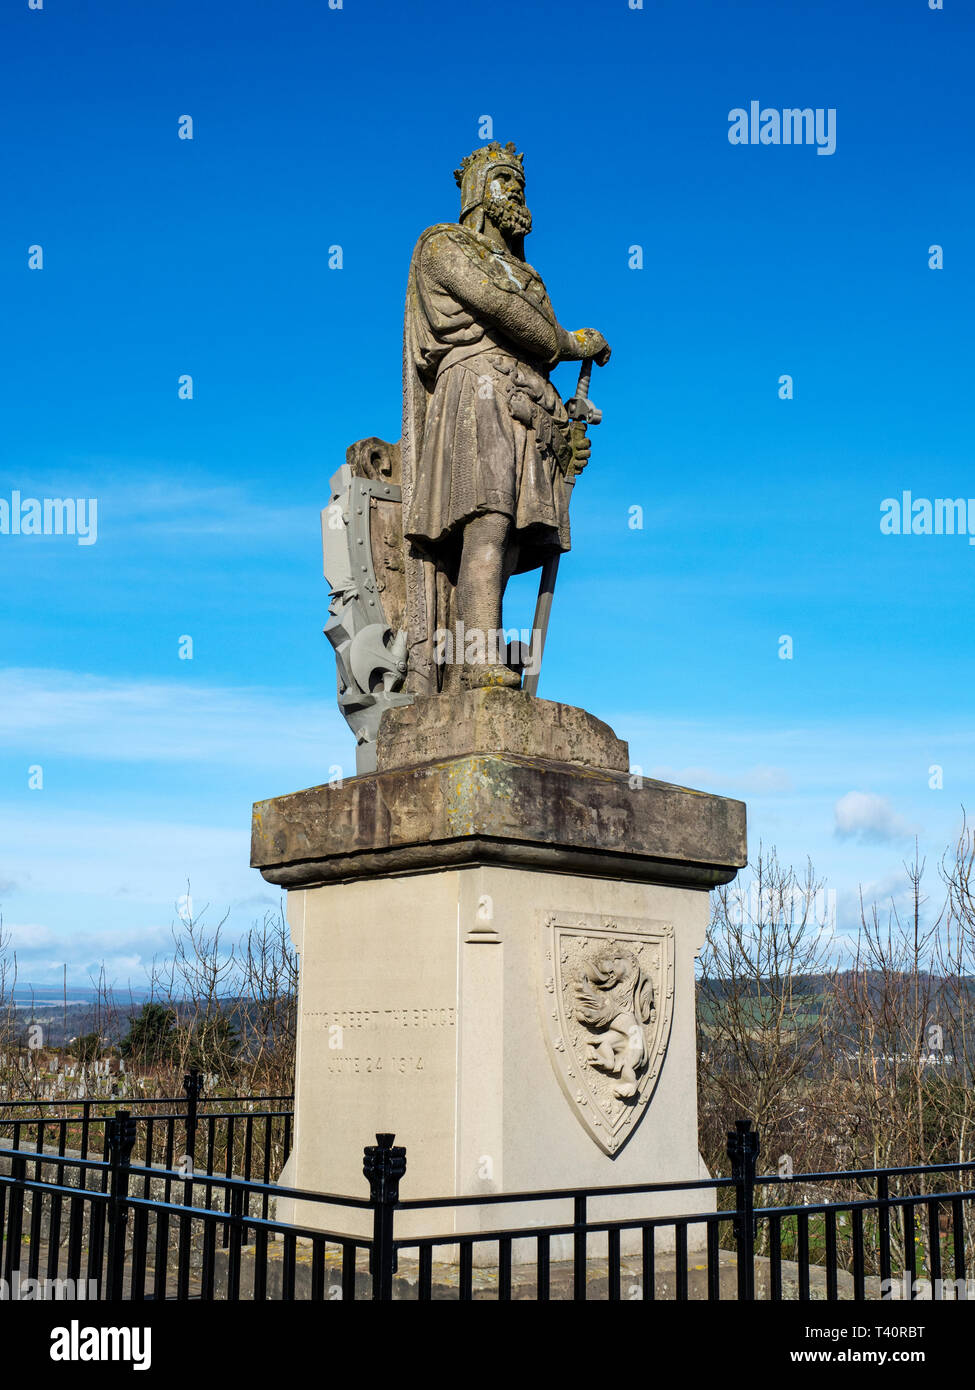 King Robert The Bruce Statue at Stirling Castle City of Stirling Scotland Stock Photo